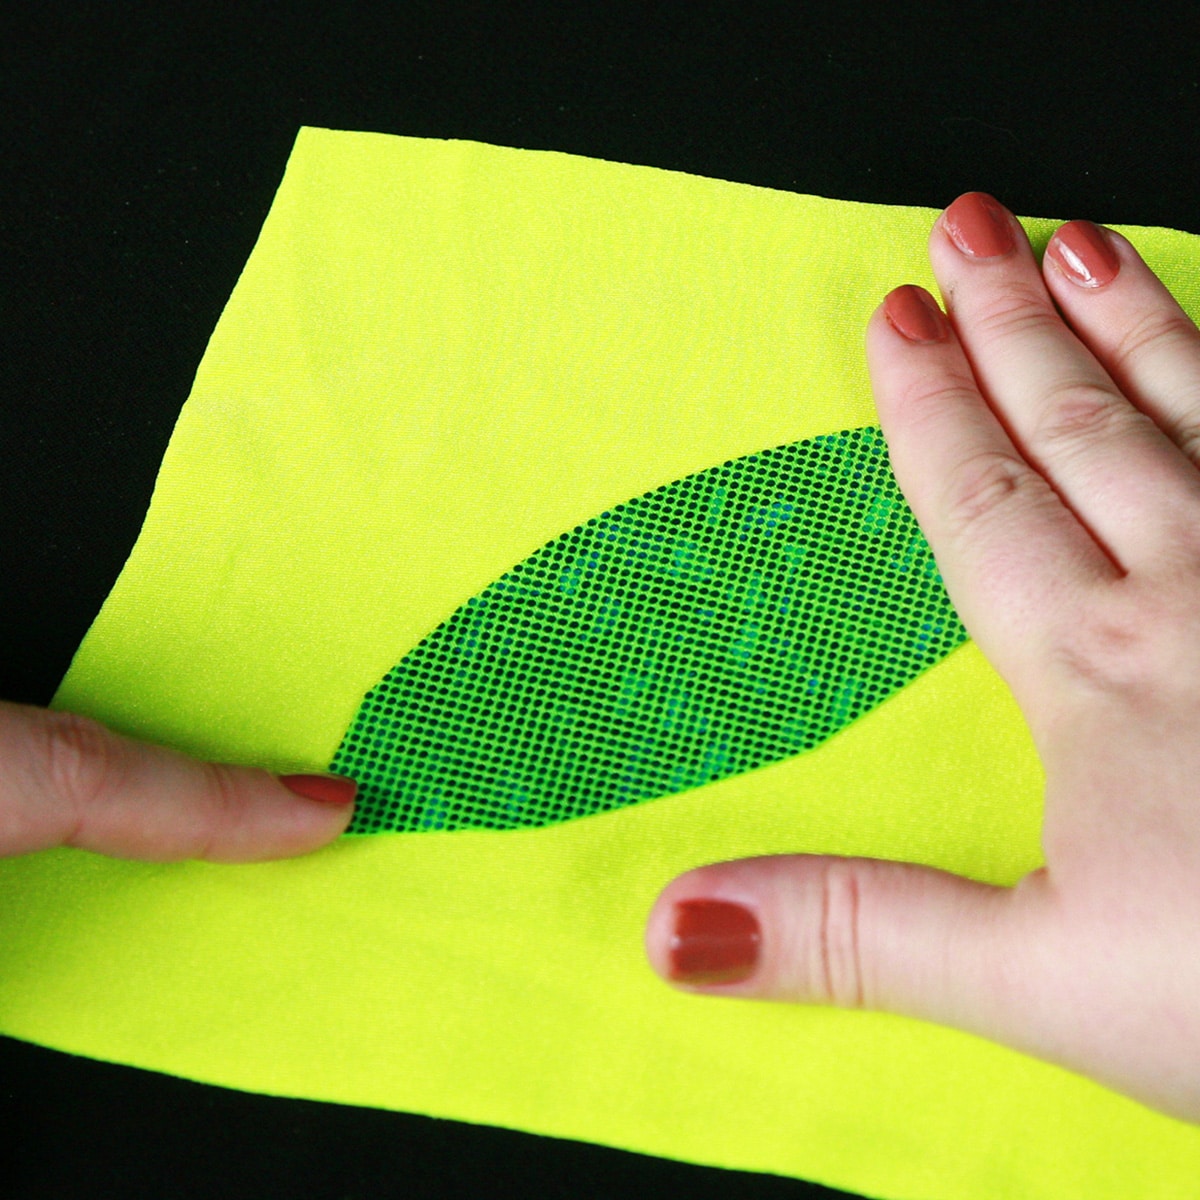 A pair of hands is smoothing out a piece of bright green spandex onto a piece of yellow spandex.